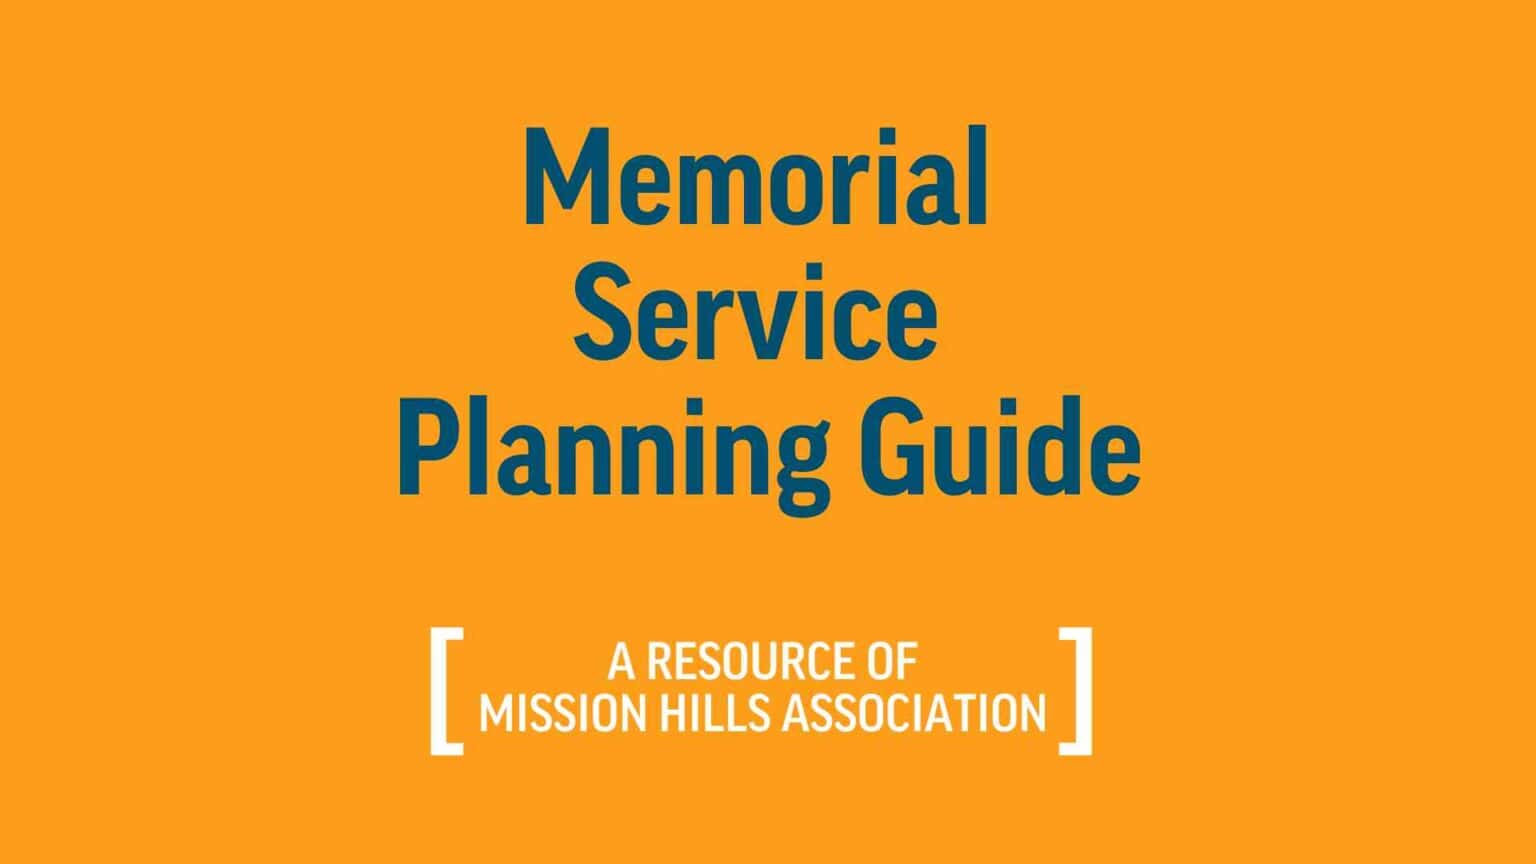 Memorial Service Planning Guide